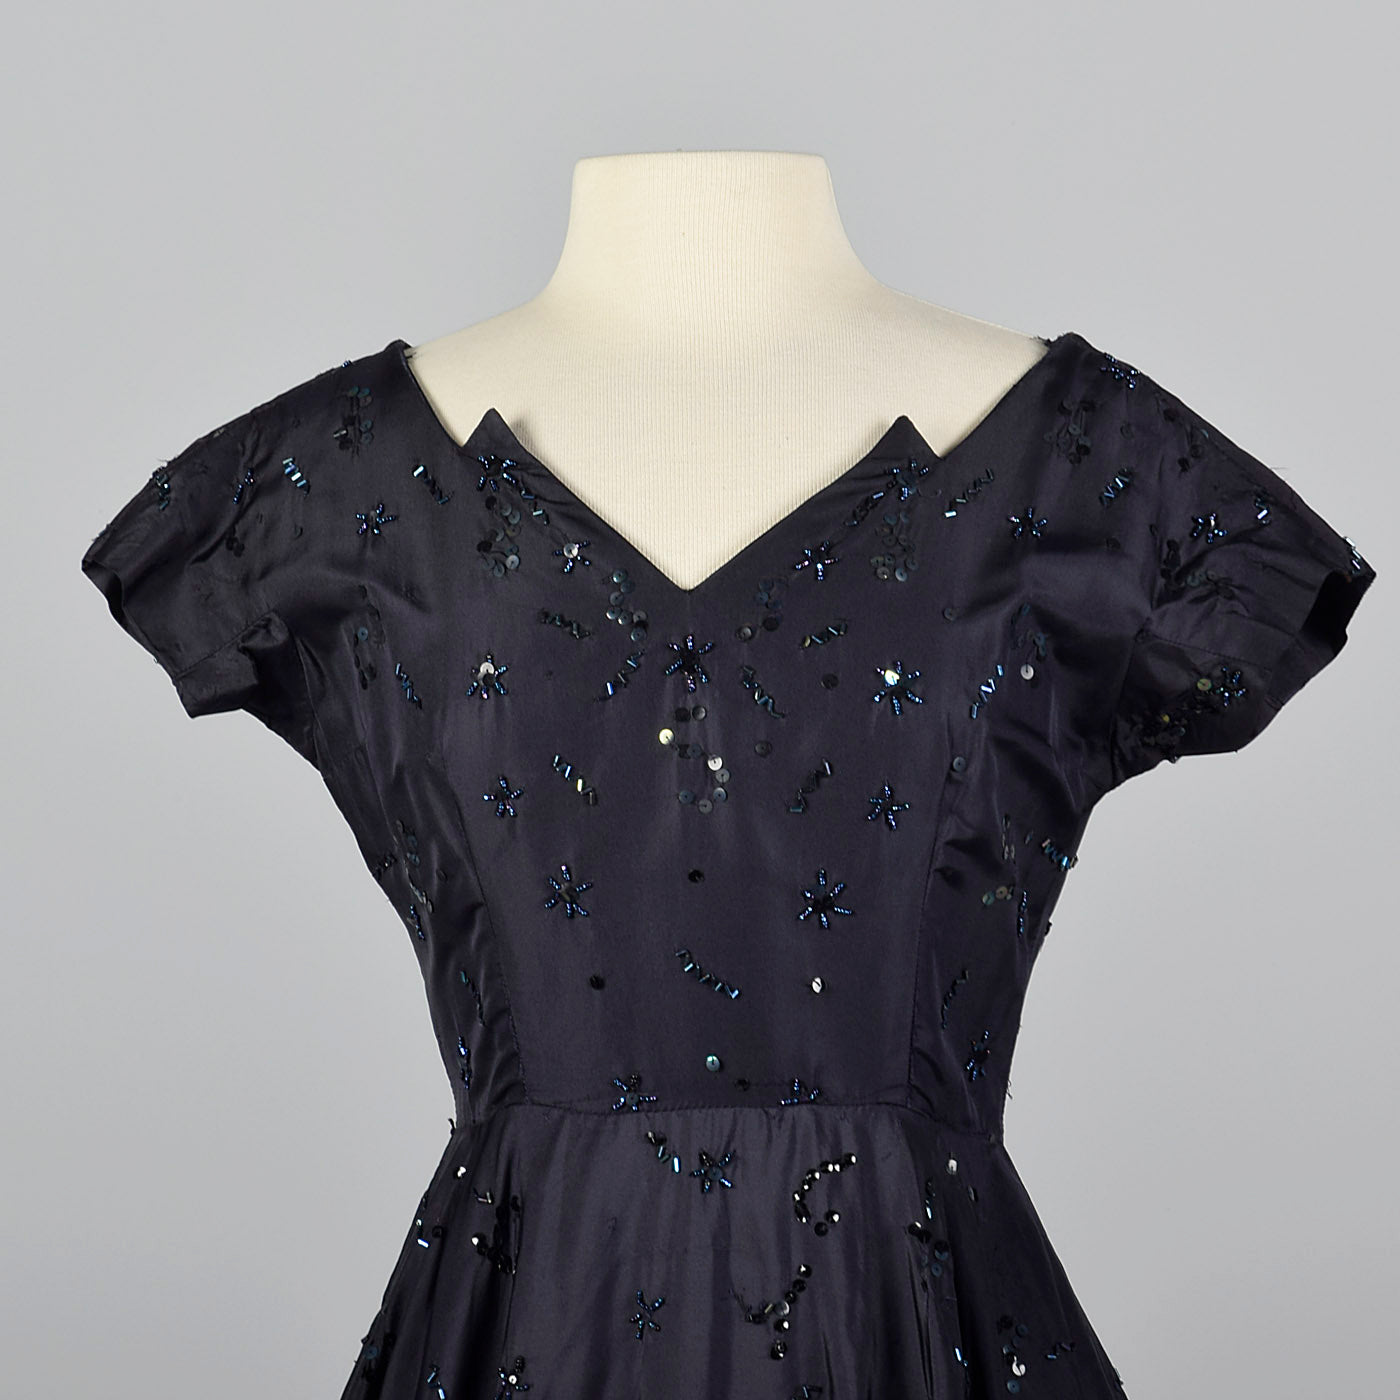 1950s Navy Party Dress with Bubble Skirt